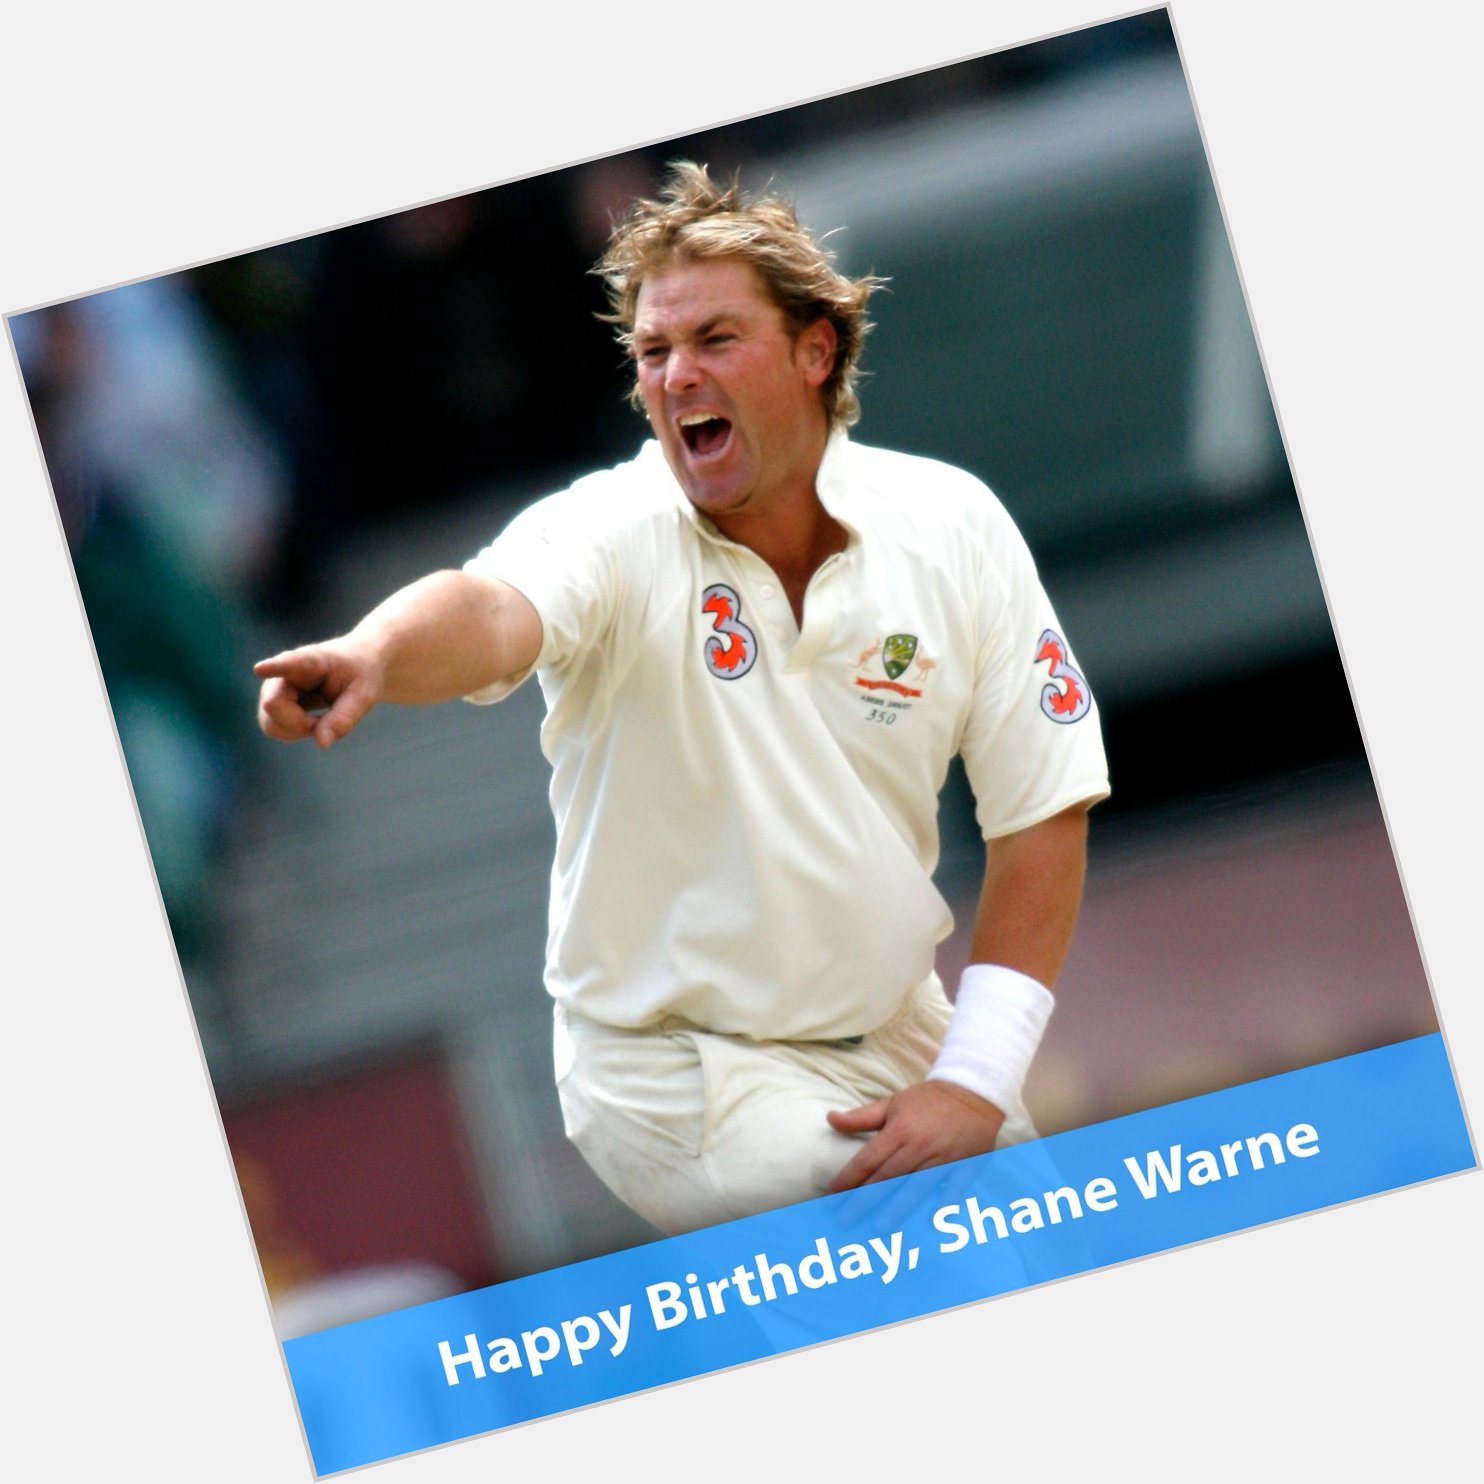 ONCE IN A GENERATION BOWLER: Happy 48th birthday to Shane Warne!  